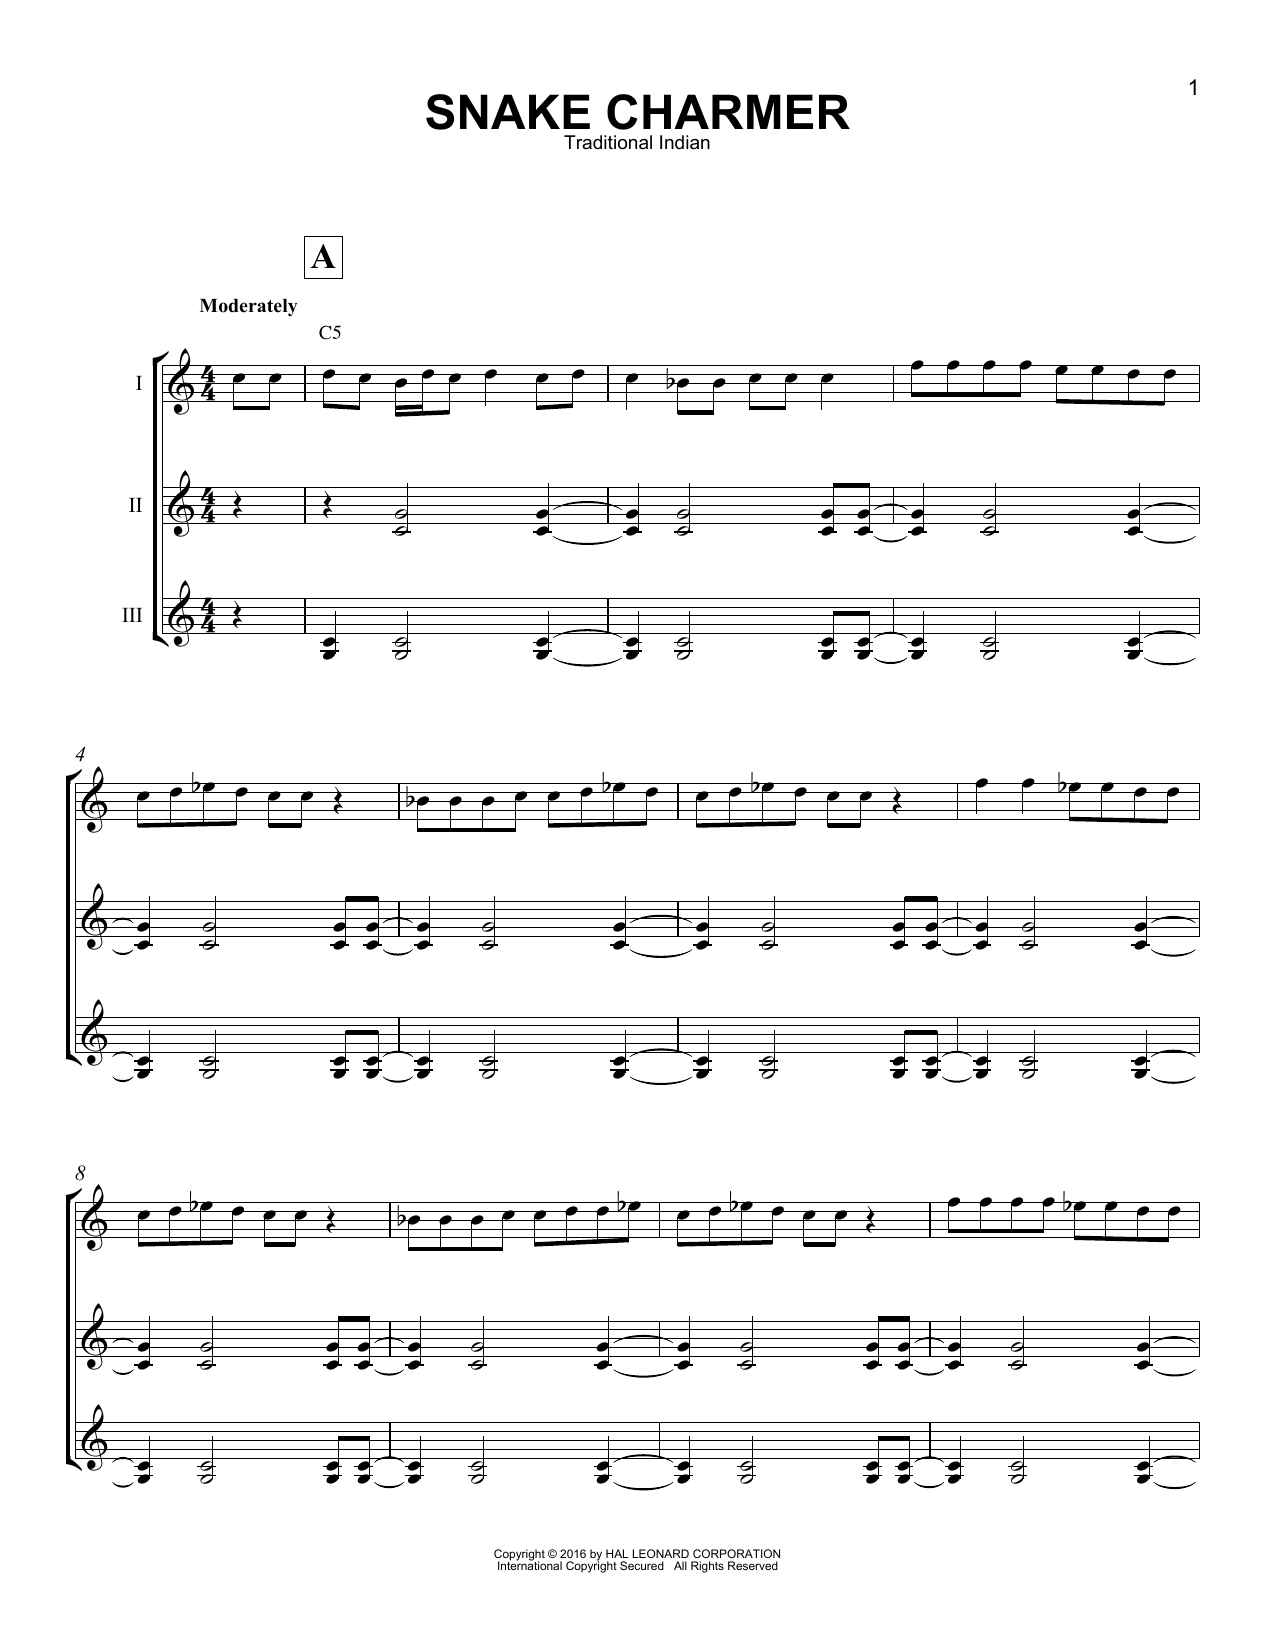 Download Traditional Indian Snake Charmer Sheet Music